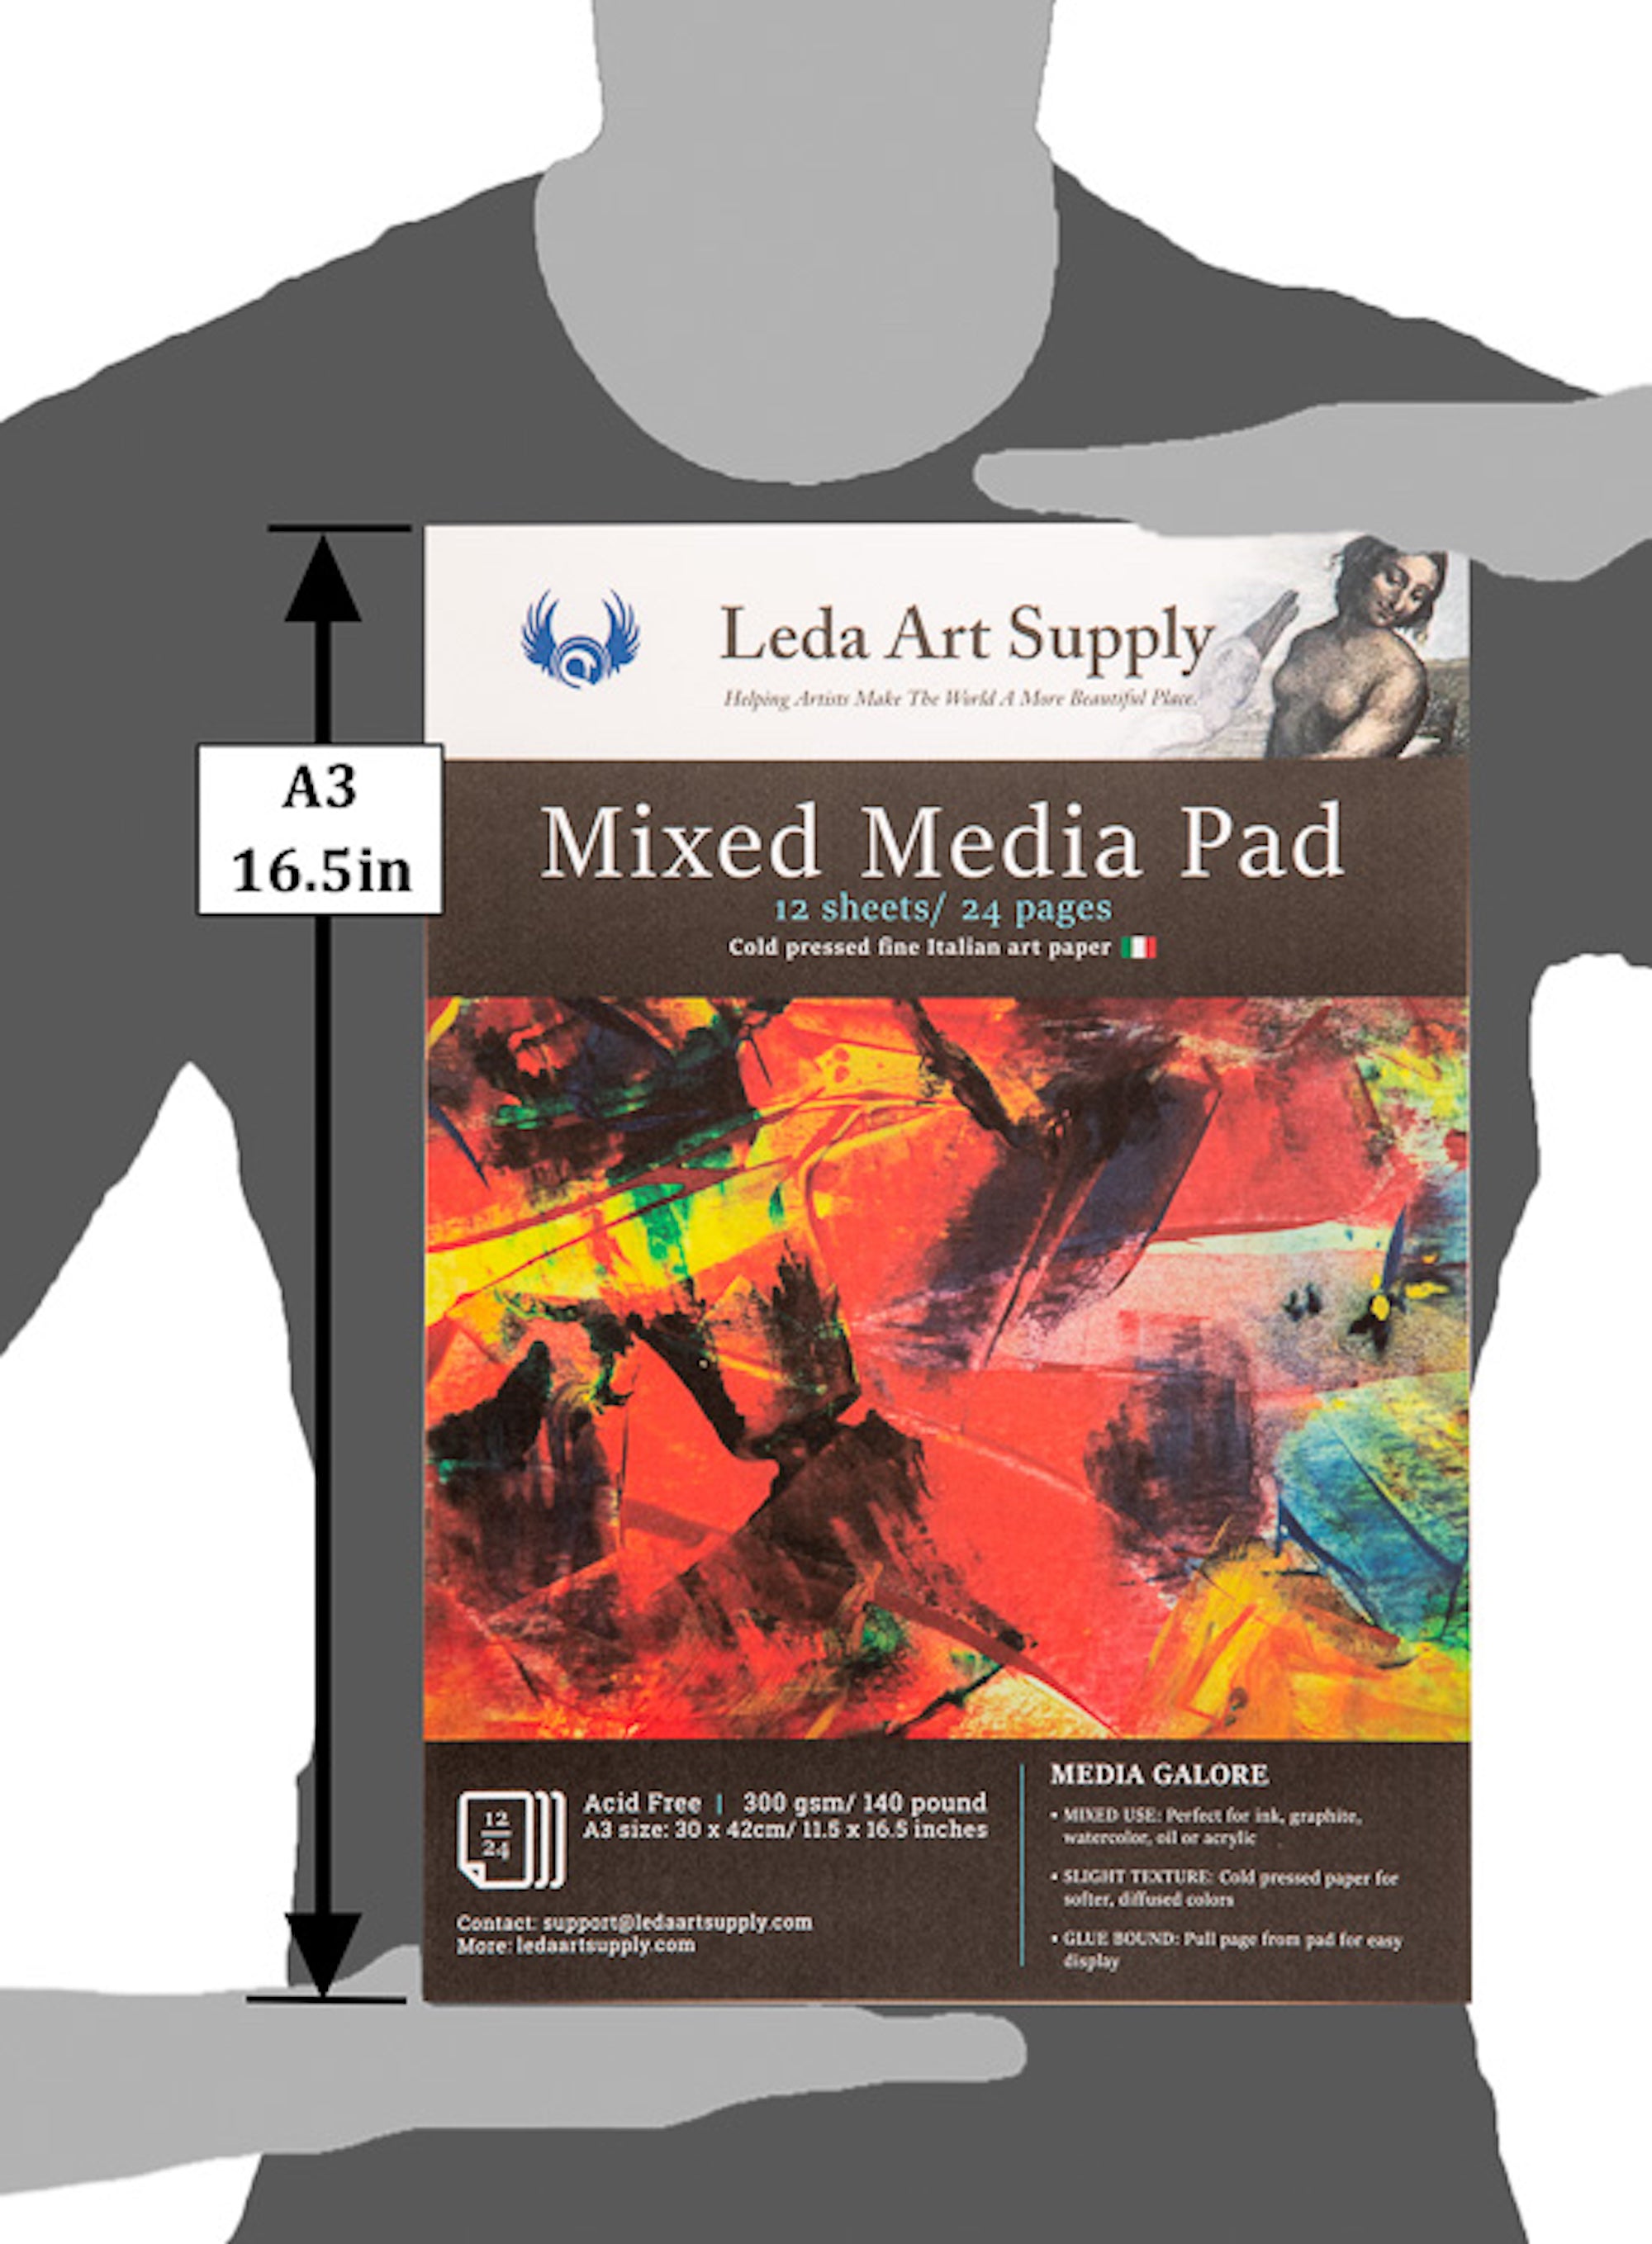  Leda's Mixed-Media Pad 2-Pack for Watercolor, Acrylic, Oil Painting, Markers, Pens or Ink (A3 size 11.5 x 16.5)